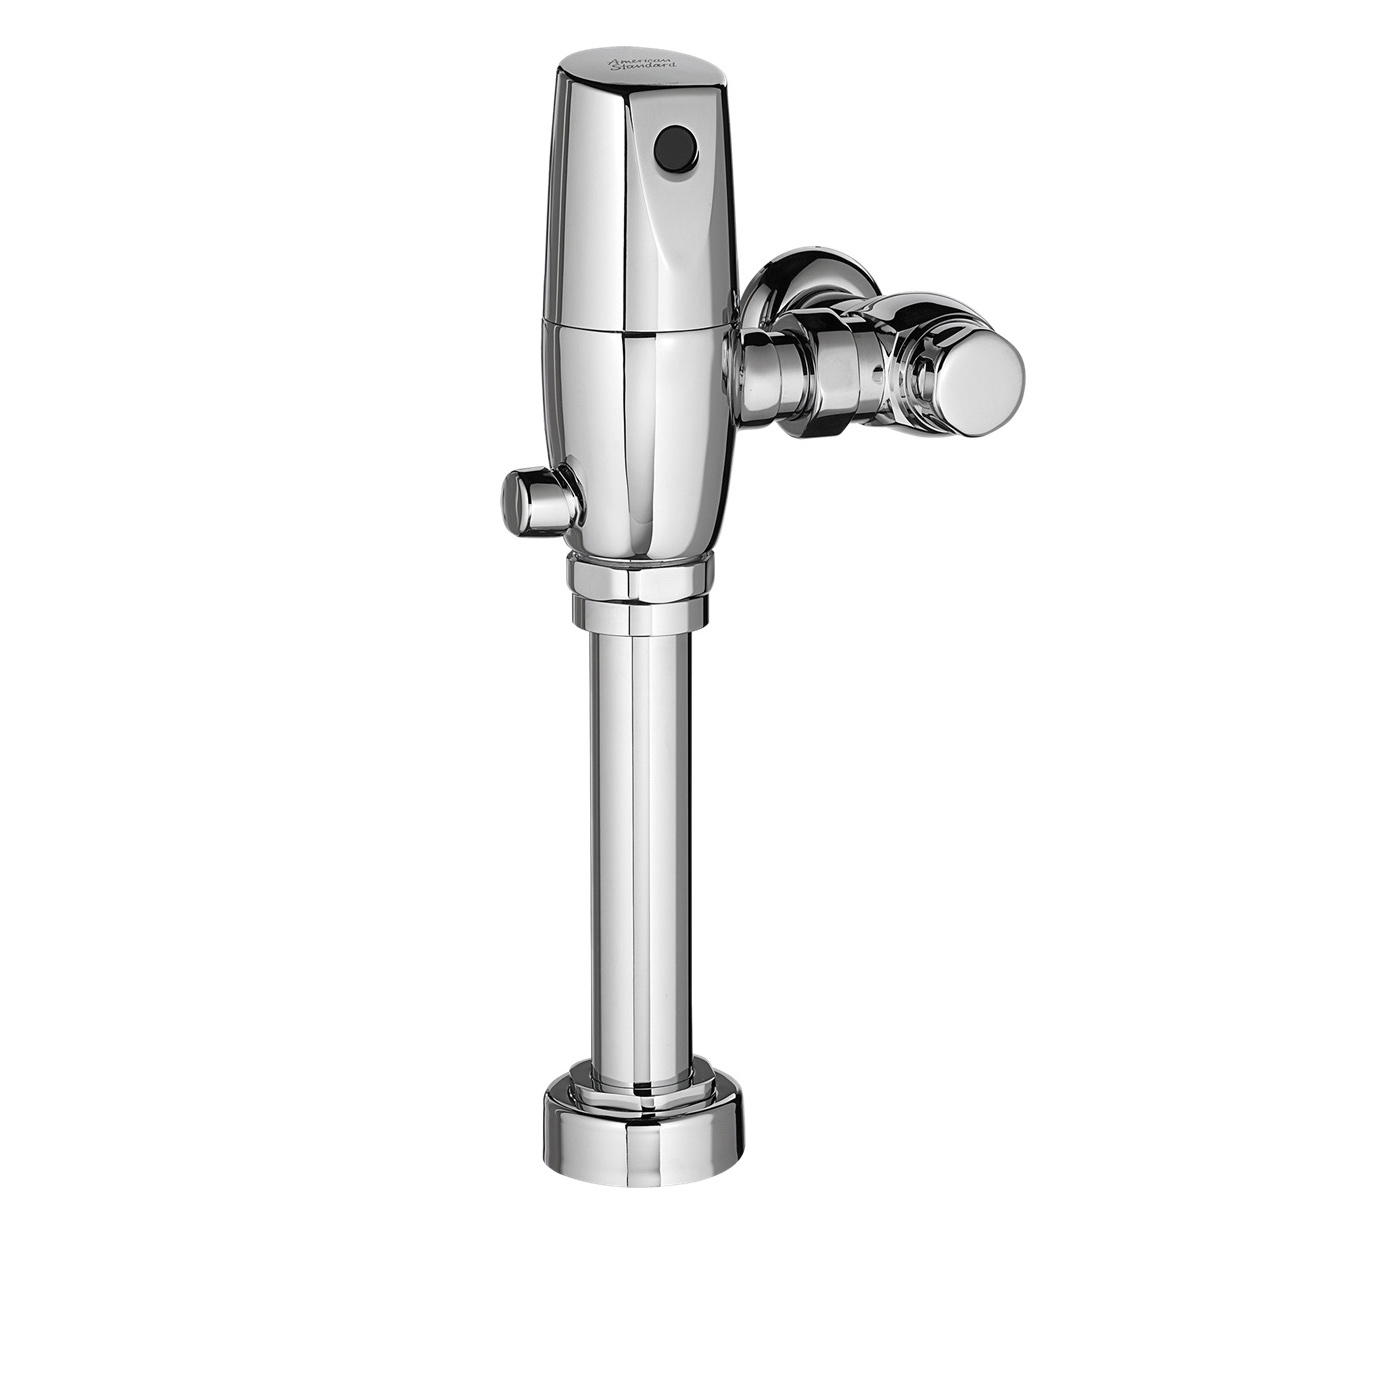 American Standard 6065121.002 Selectronic® Exposed Toilet Flush Valve, CR-P2 Lithium Battery, 1.28 gpf, 1 in Inlet, 1-1/2 in Spud, 25 to 80 psi, Polished Chrome, Import